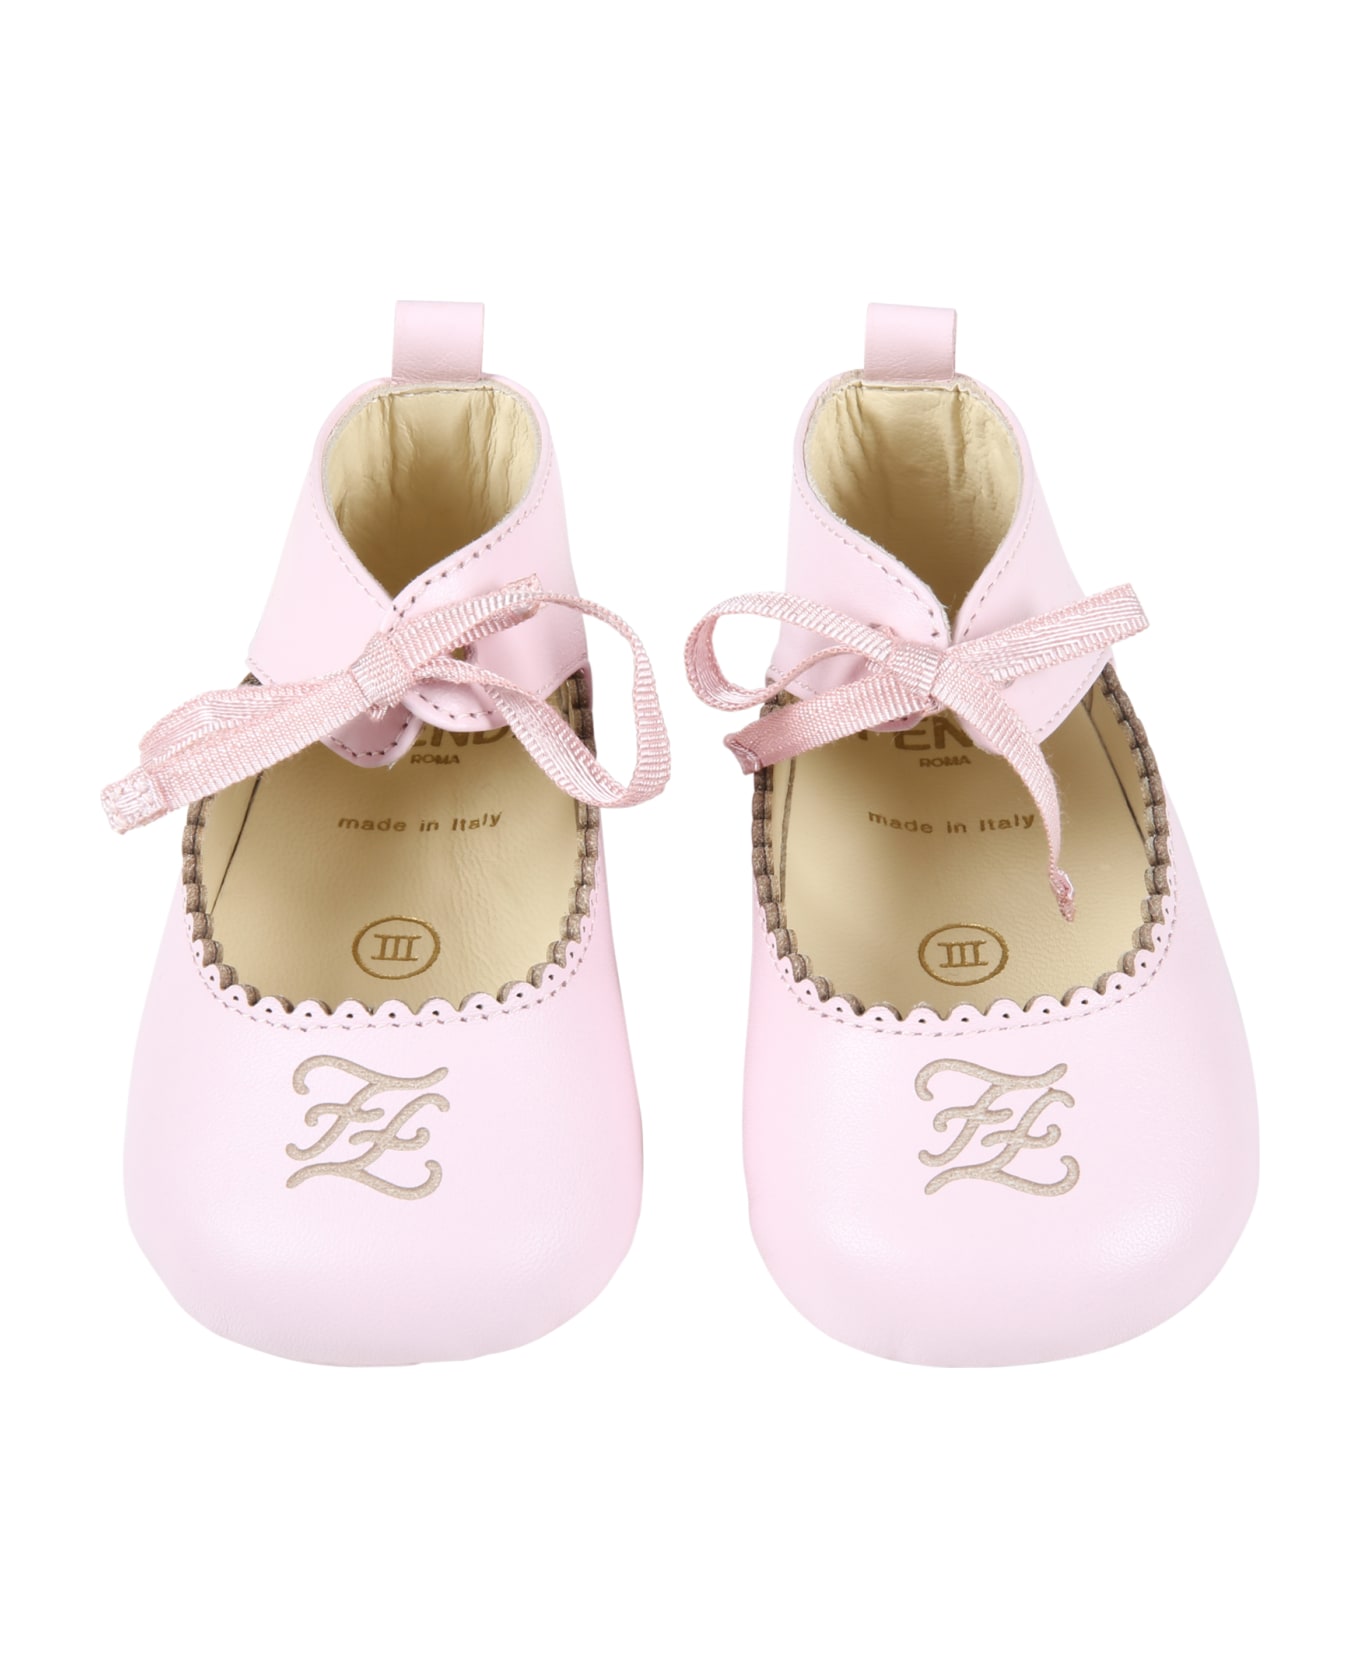 Fendi Pink Ballet Flats For Baby Girl With Karligraphy Ff - Pink